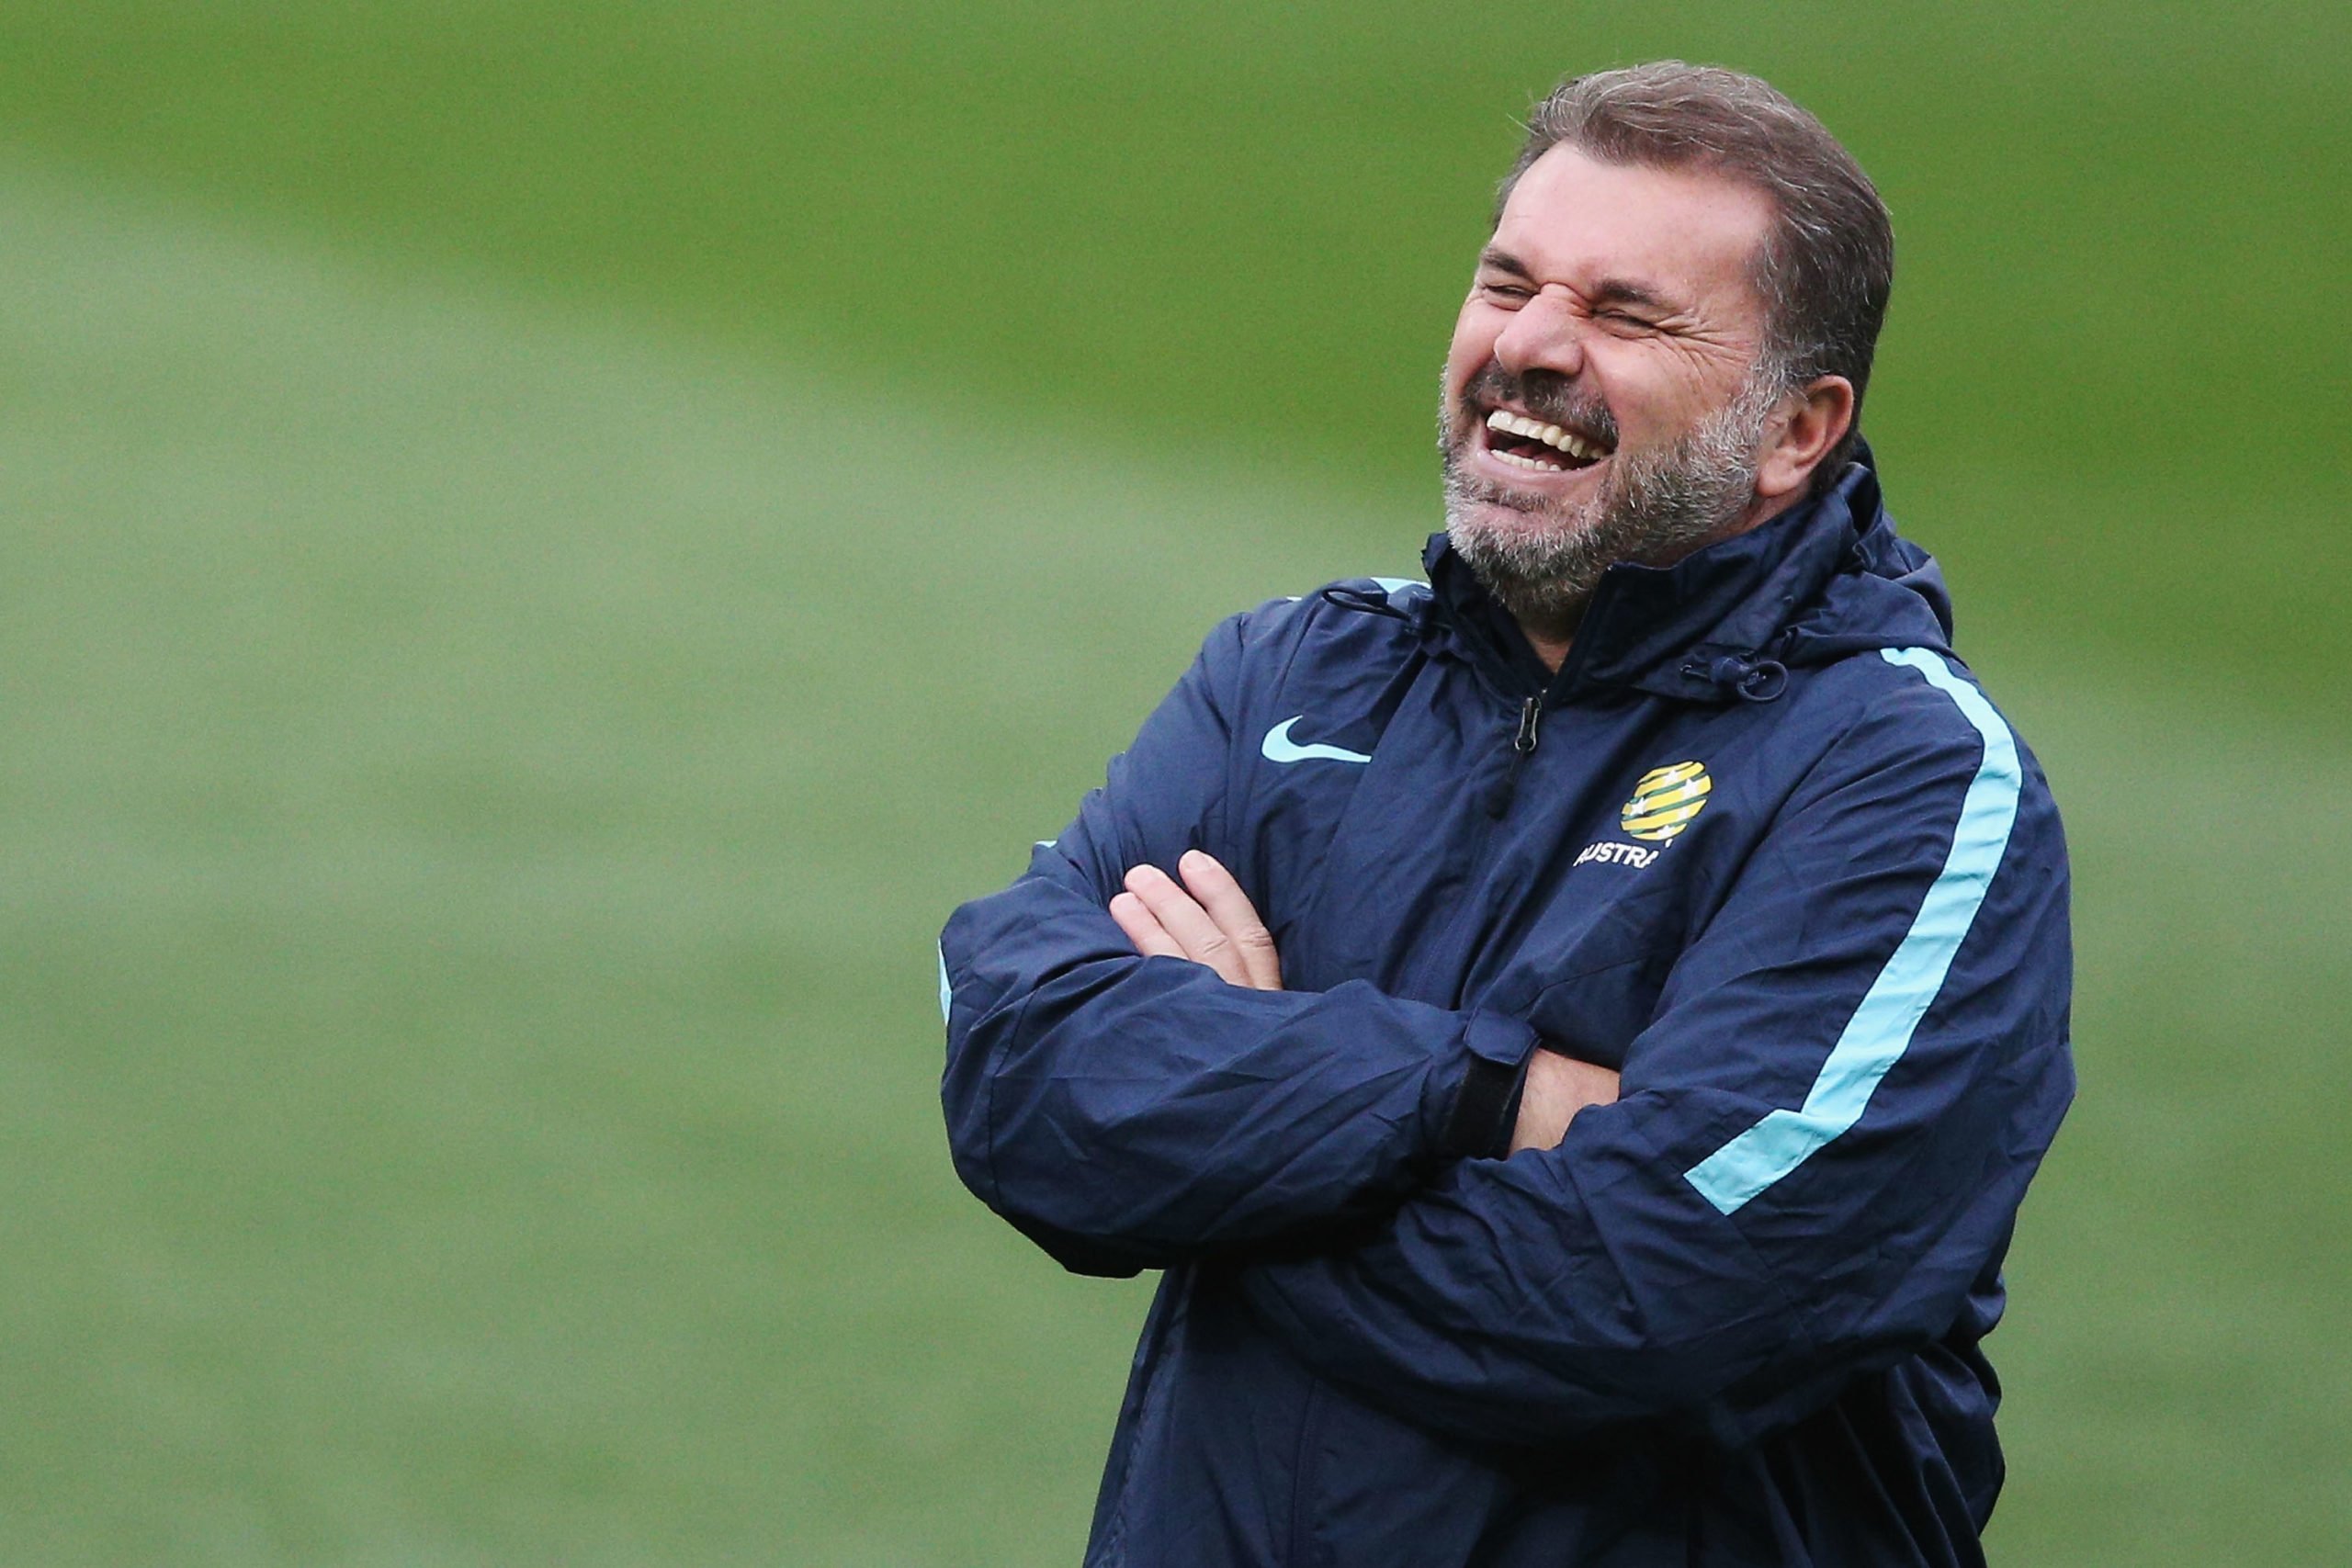 Ange Postecoglou's steely calm is a refreshing change of pace for Celtic supporters